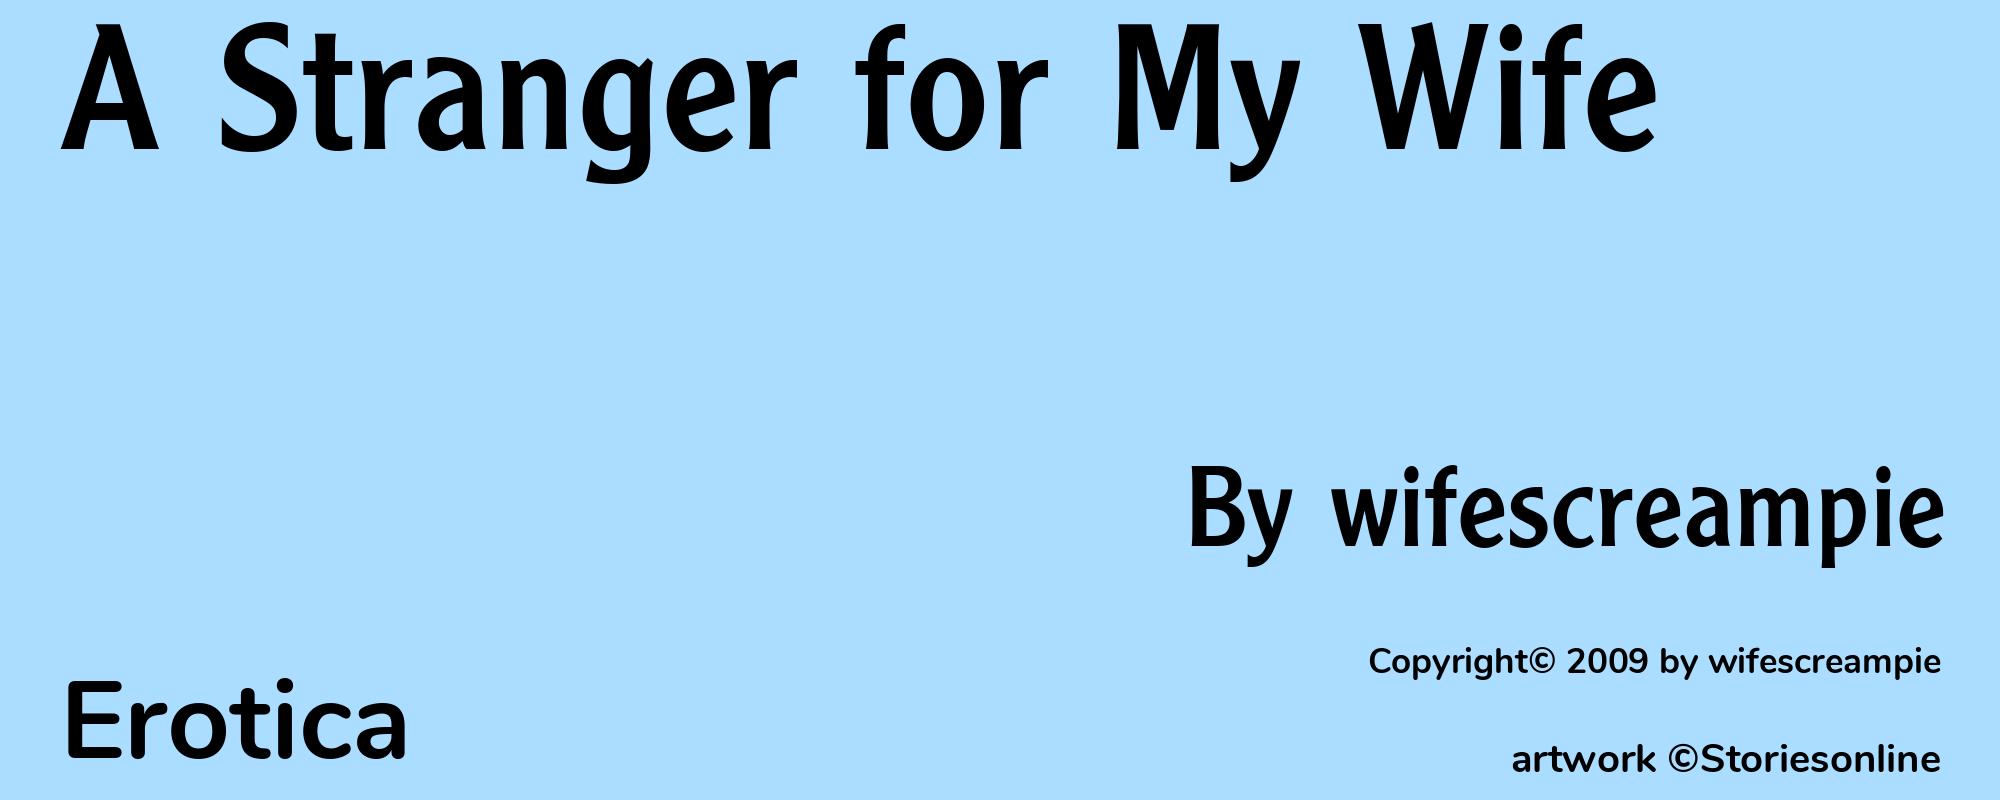 A Stranger for My Wife - Cover